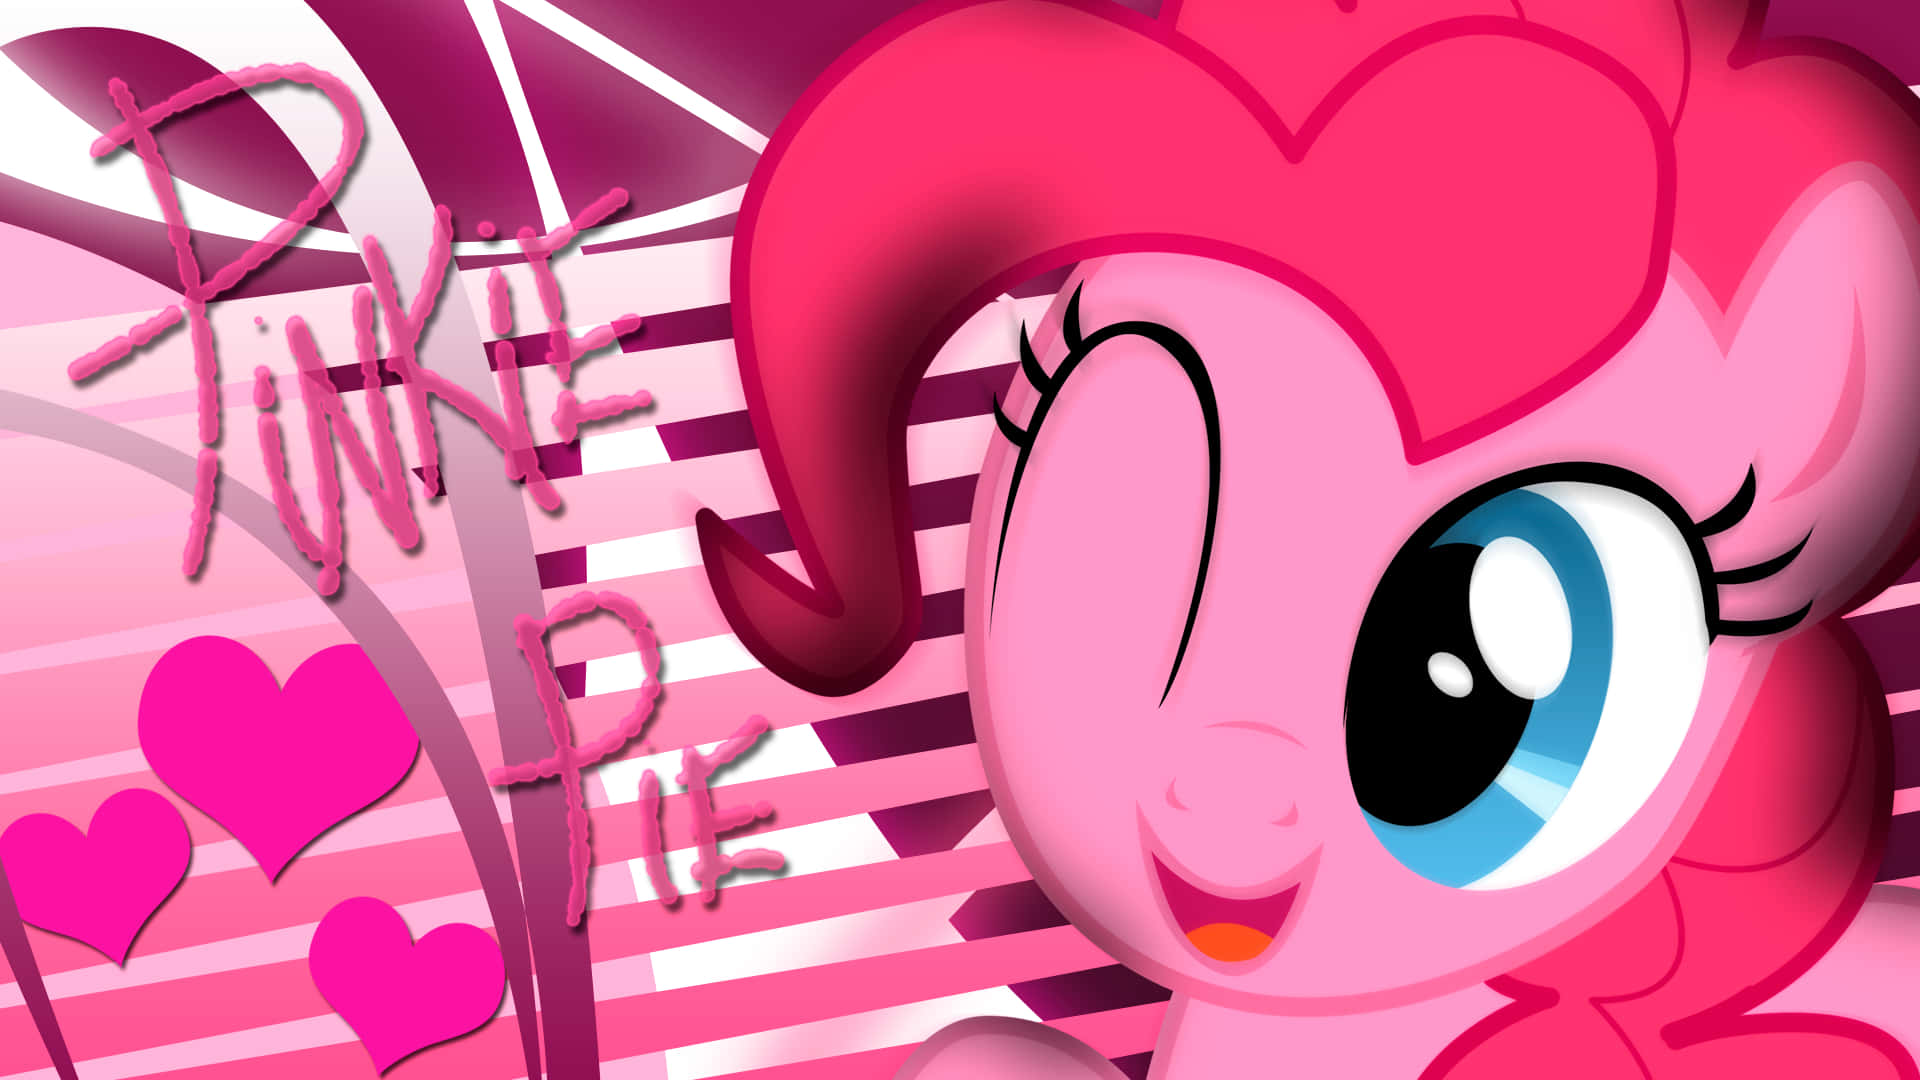 Pinkie Pie with balloons flying through the clouded sky